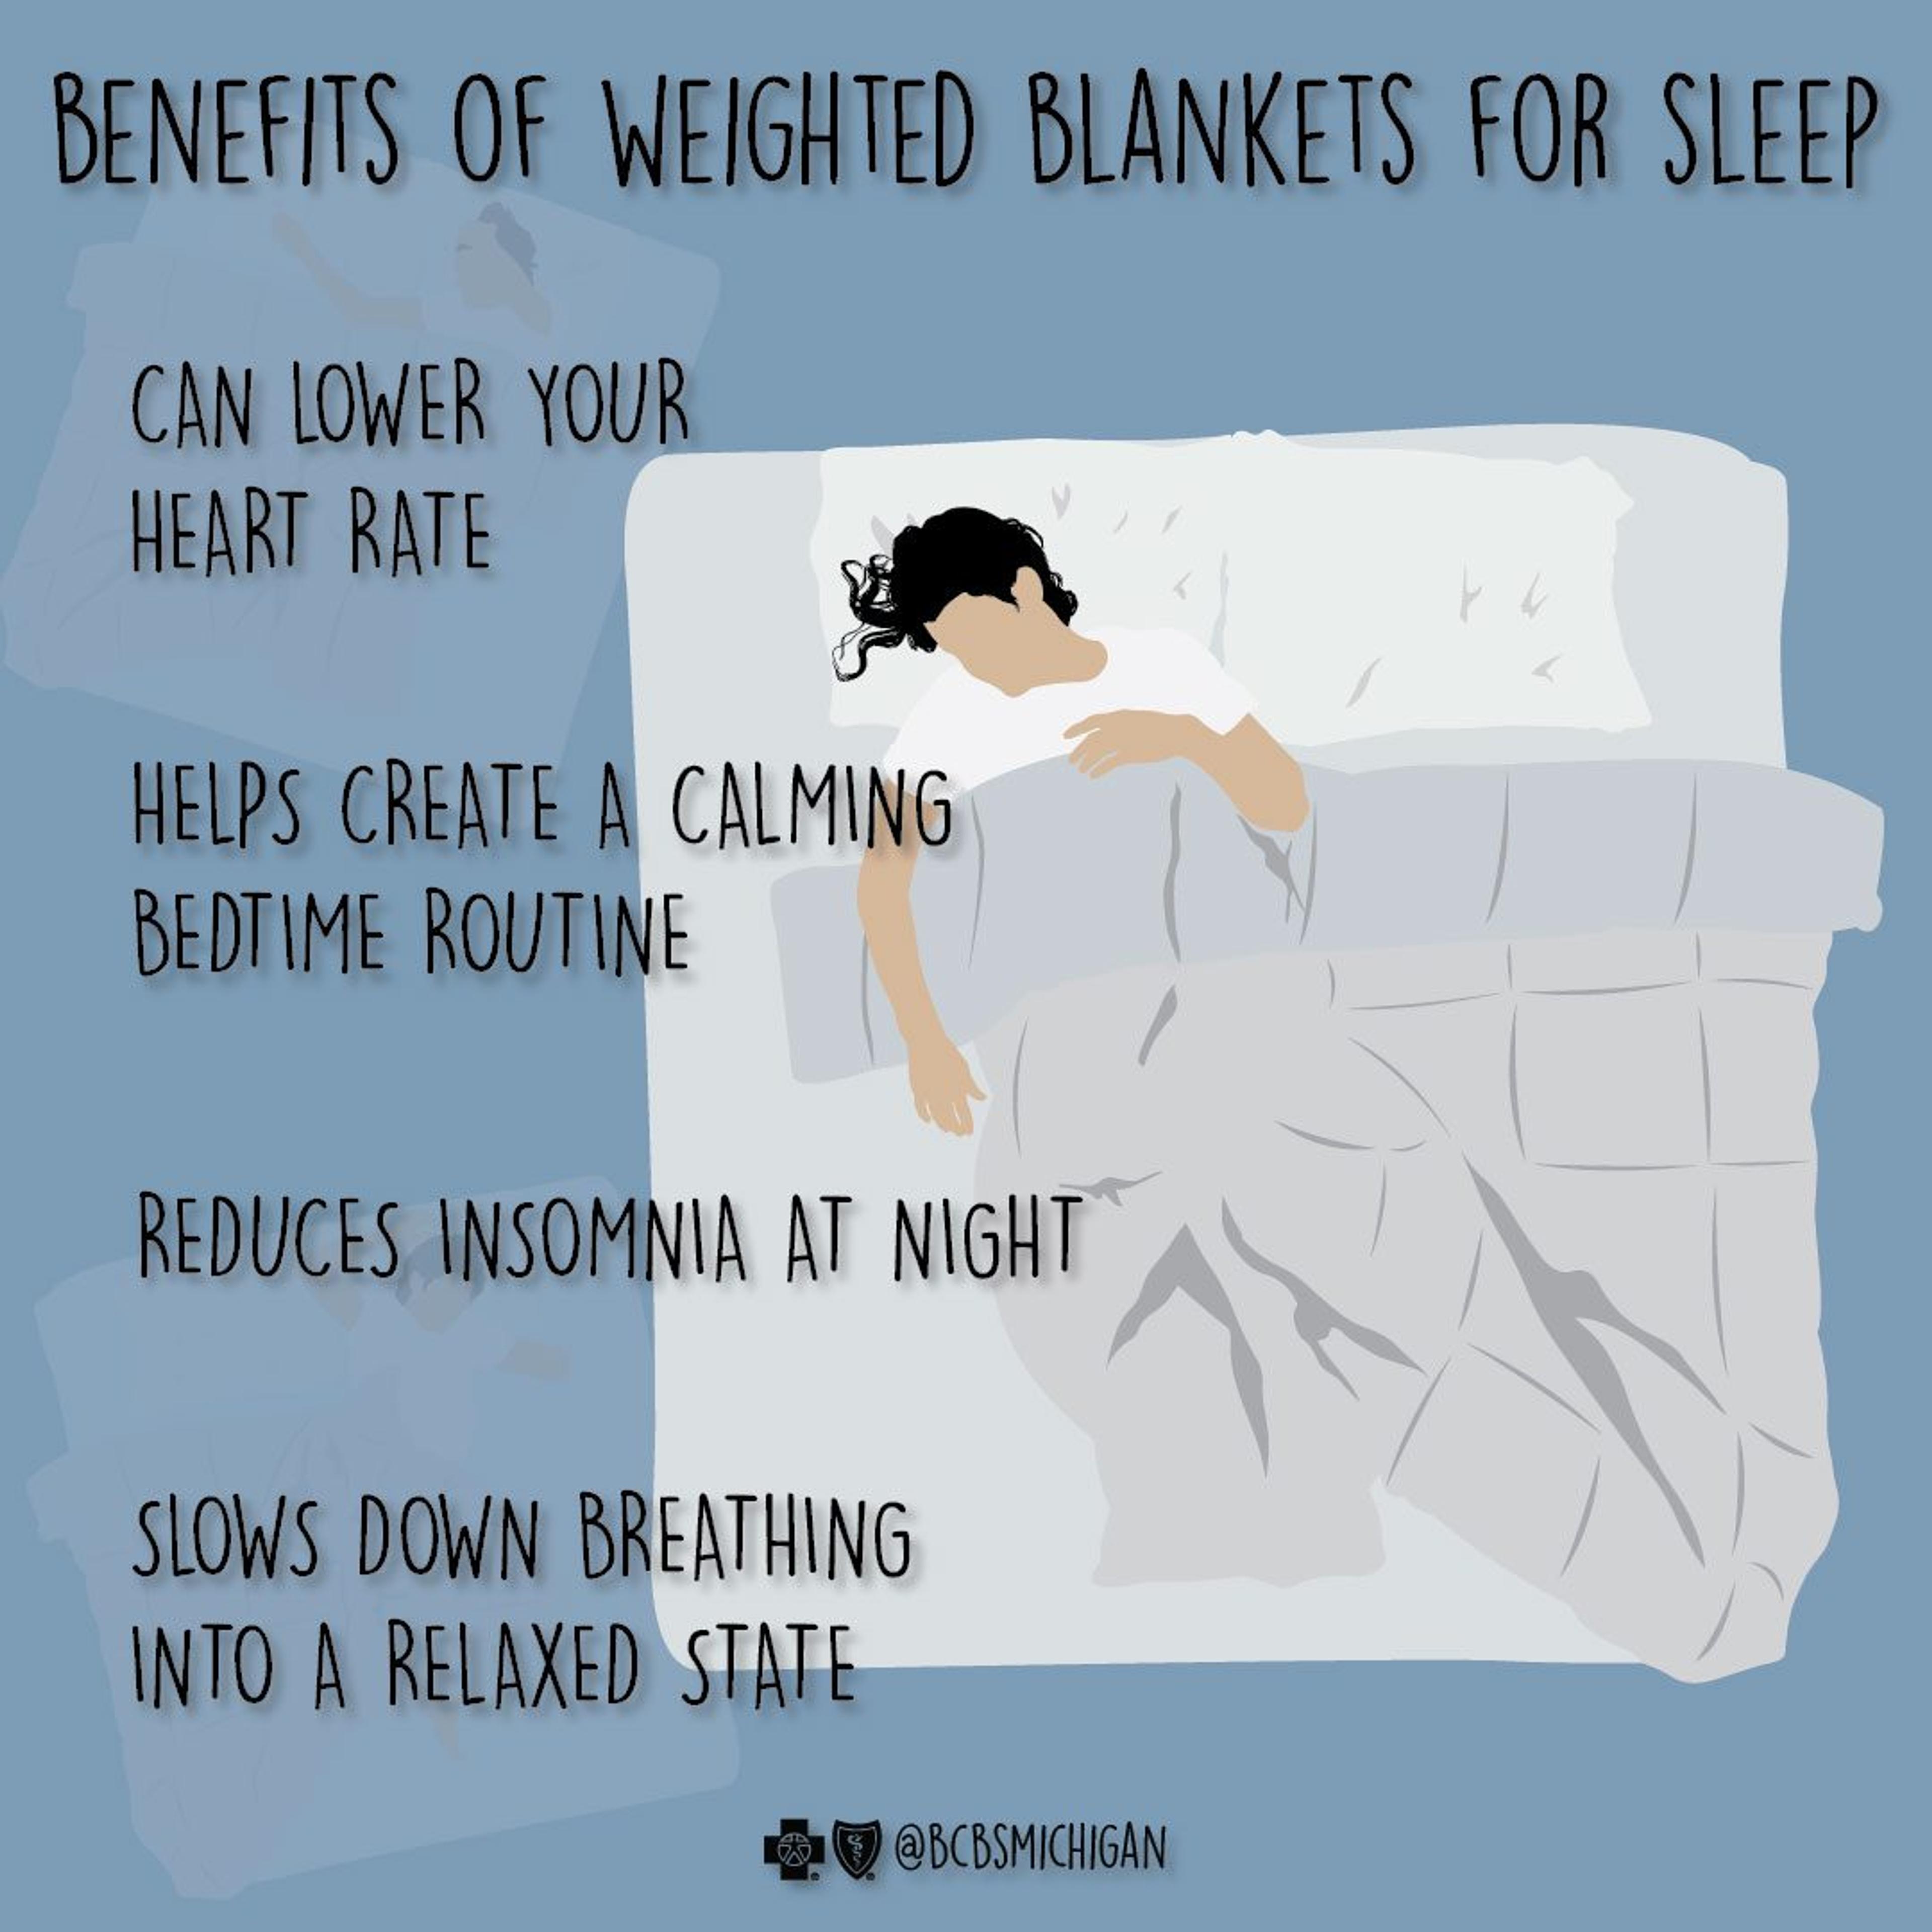 Weighted blankets for sleep